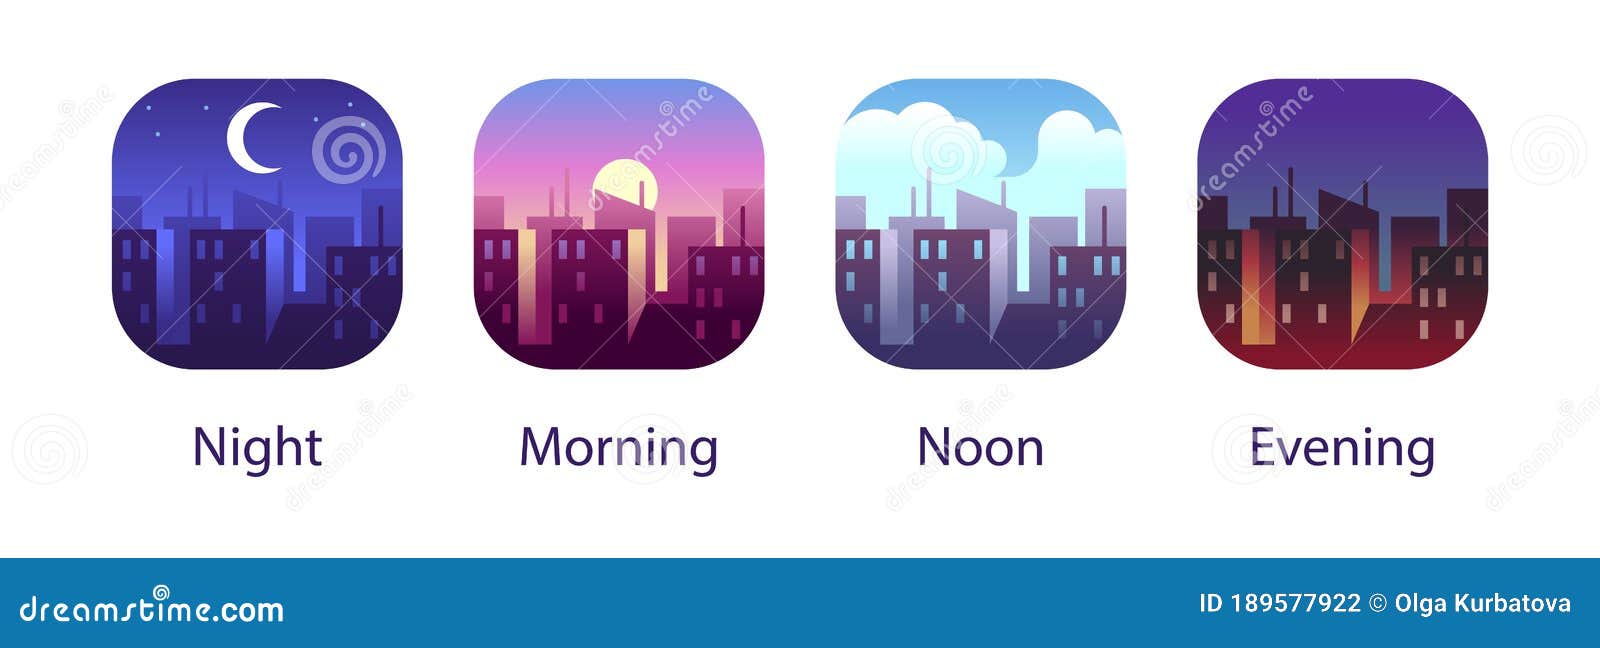 different times of day. night, morning, noon and evening in city landscape. buildings and skyscrapers urban concept